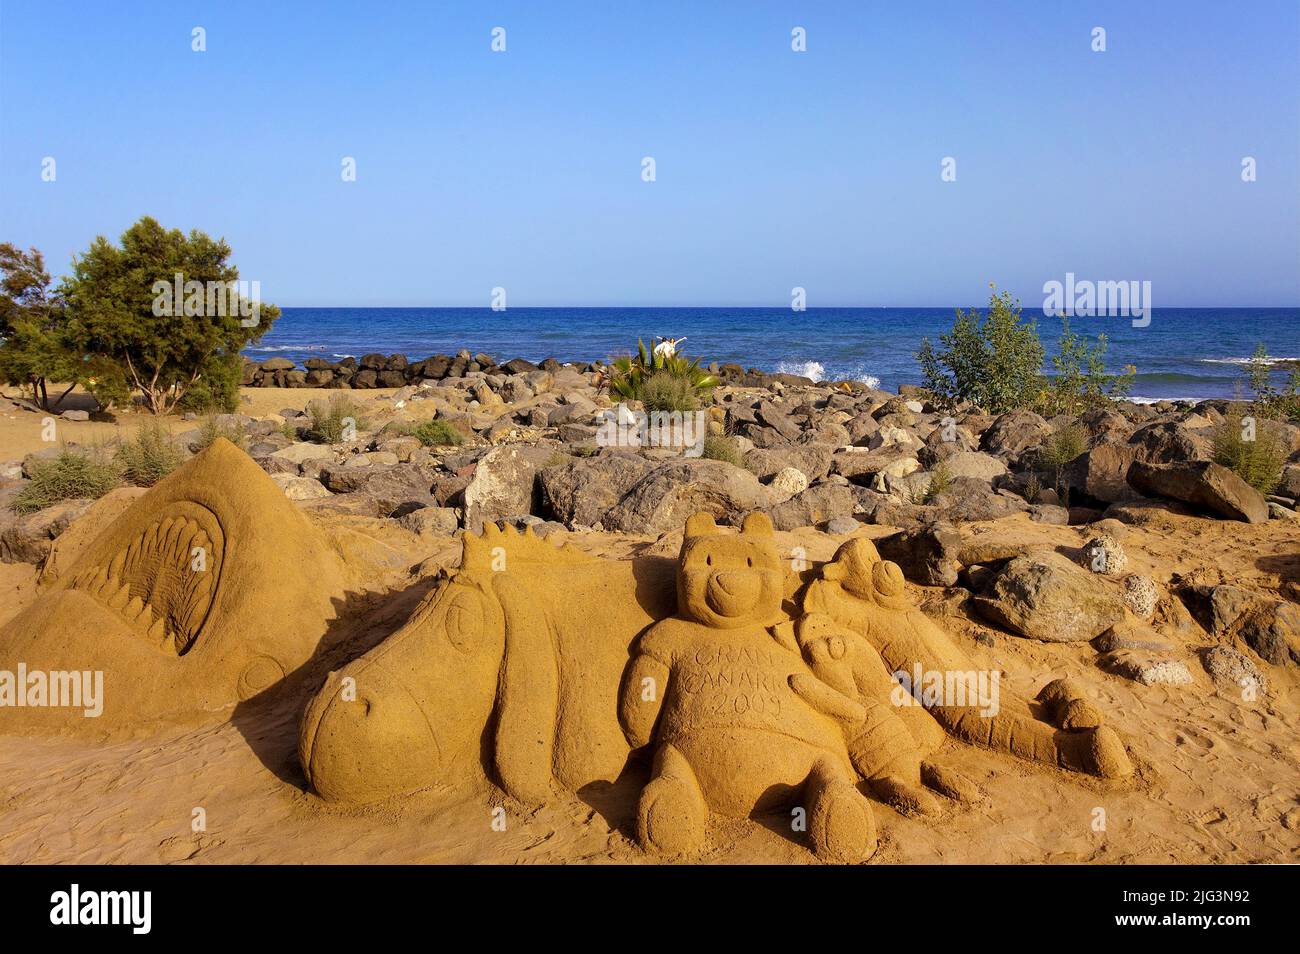 Sand sculptures at the beach of Maspalomas, Grand Canary, Canary islands, Spain, Europe Stock Photo